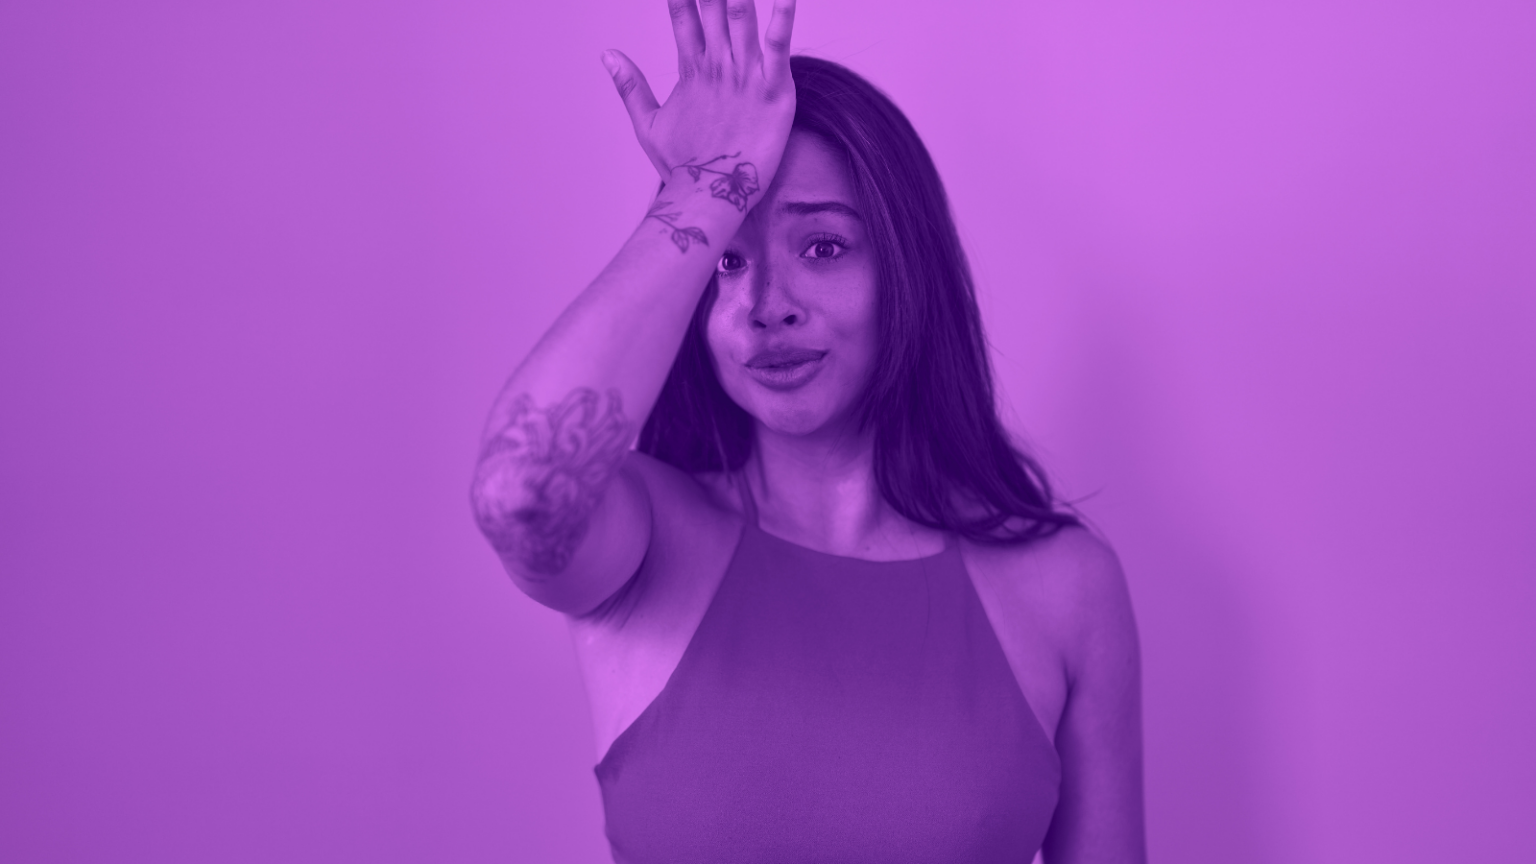 Purple photo of a feminine person in a tank top making an "oops" face with their palm on their forehead